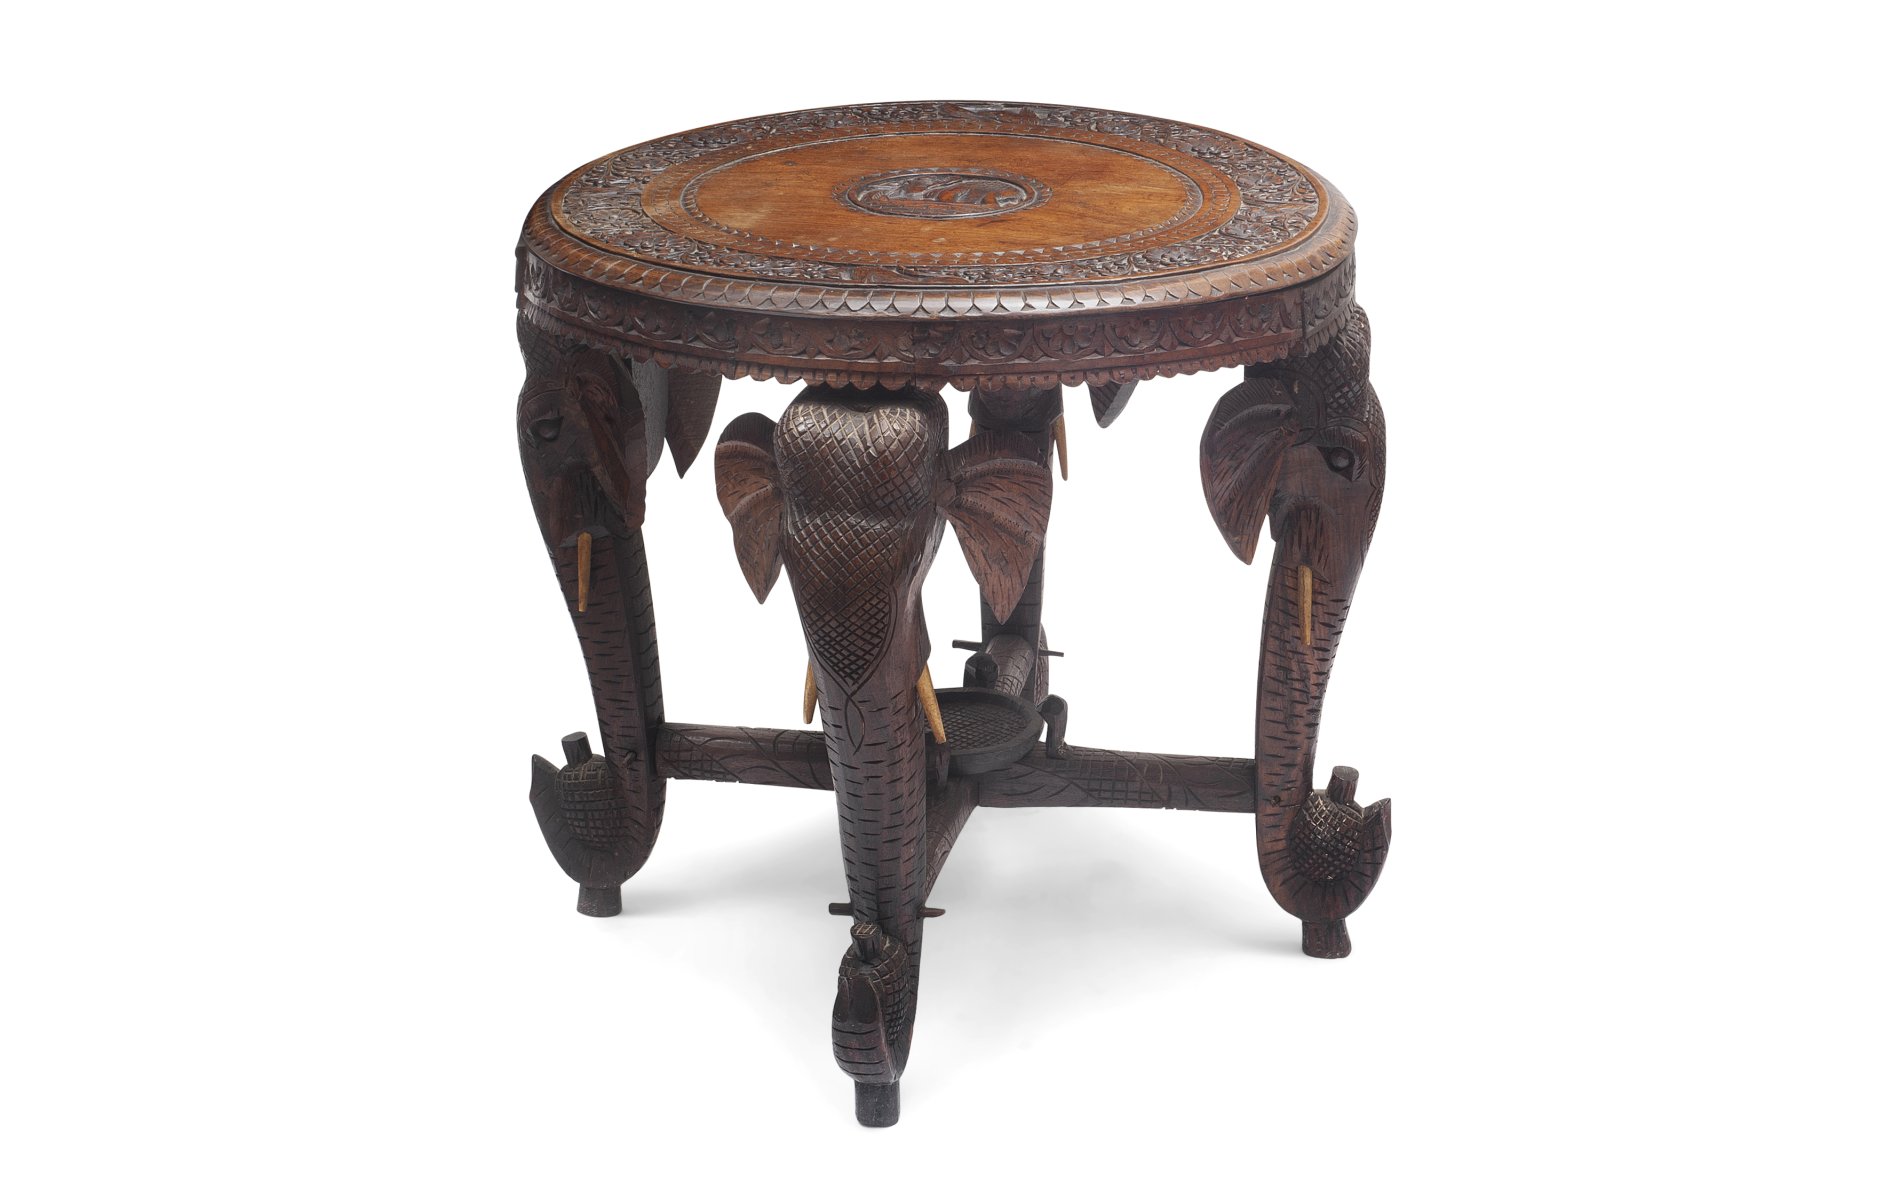 AN EARLY 20TH CENTURY INDIAN CARVED WOOD TABLE OF ELEPHANT THEME